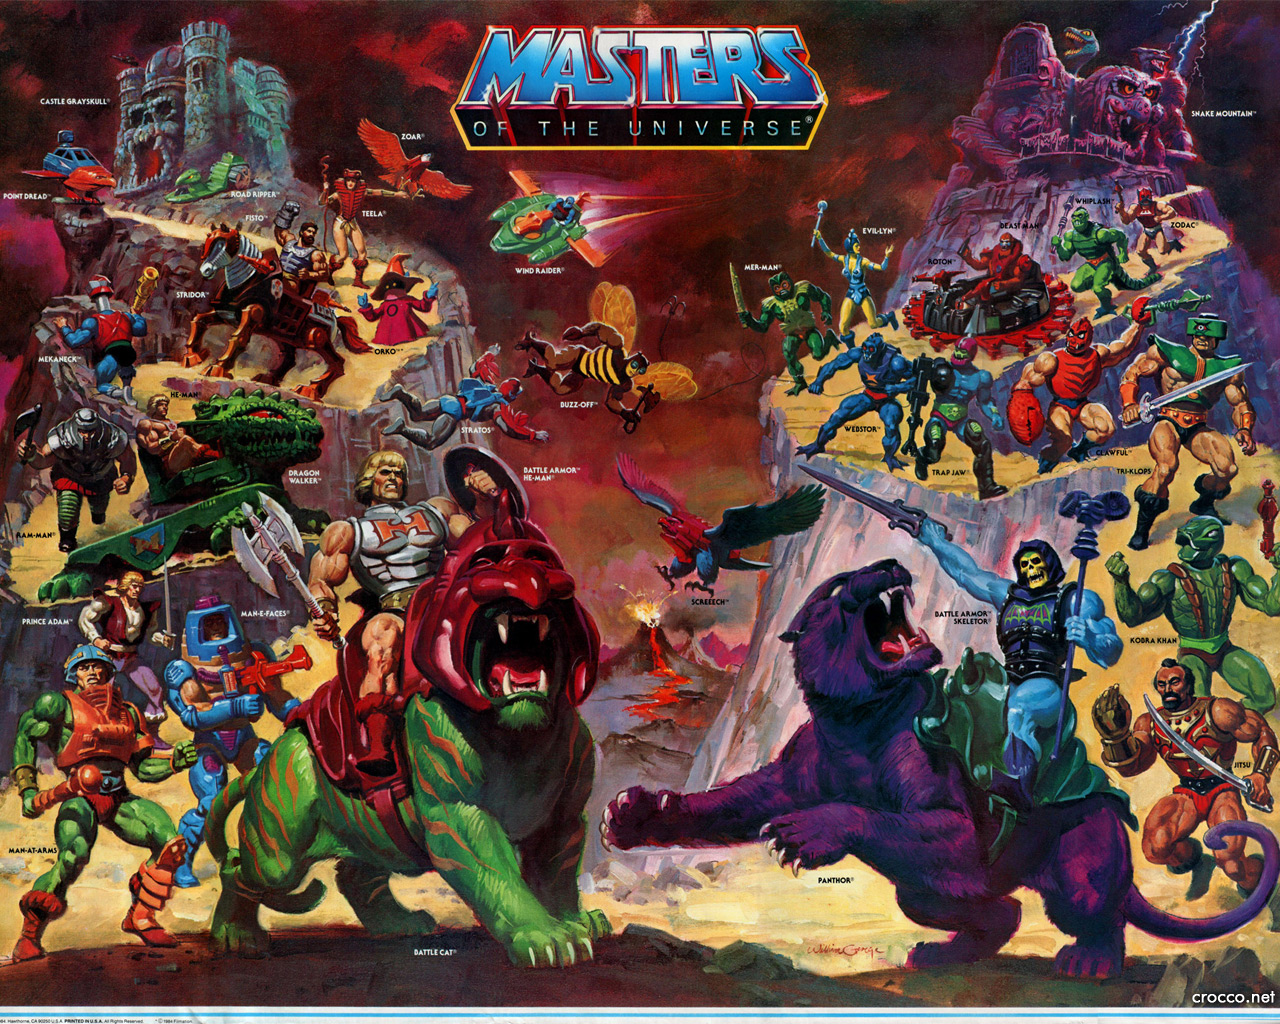 He Man Characters Wallpapers on WallpaperDog